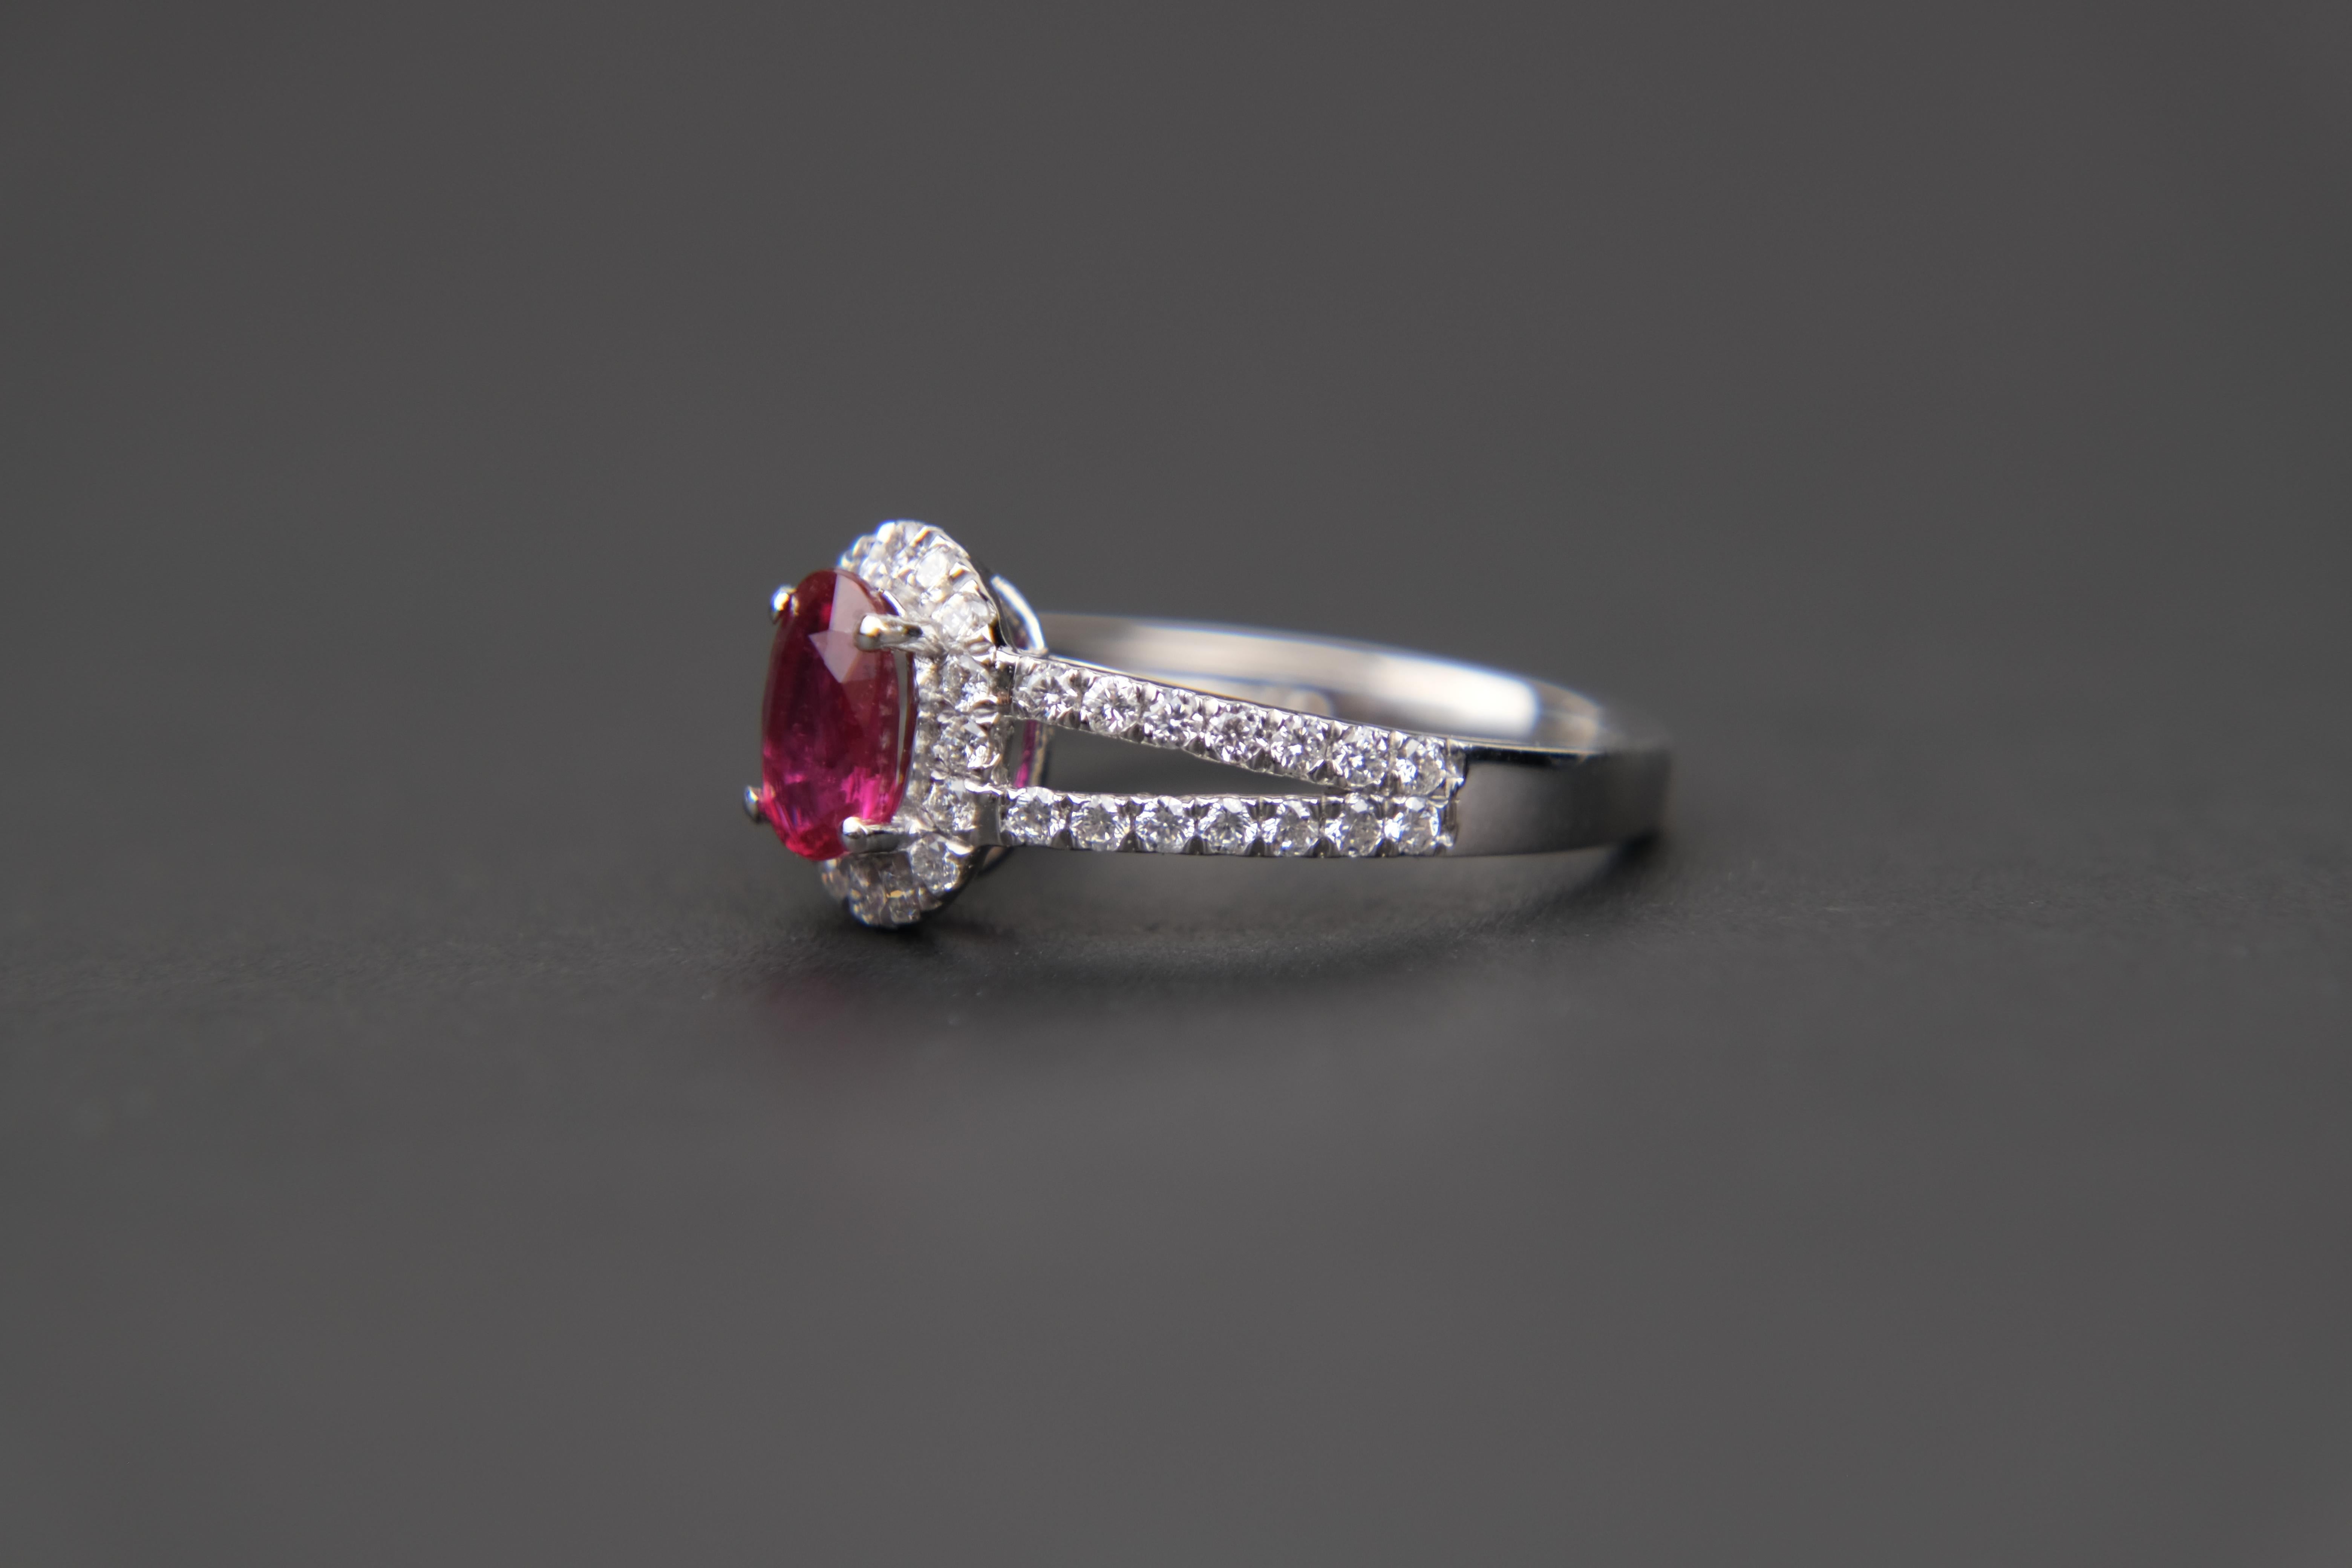 Platinum 1.04 Carat Unheated Ruby and Diamond Ring with GIA Report In Good Condition For Sale In Bradford, Ontario